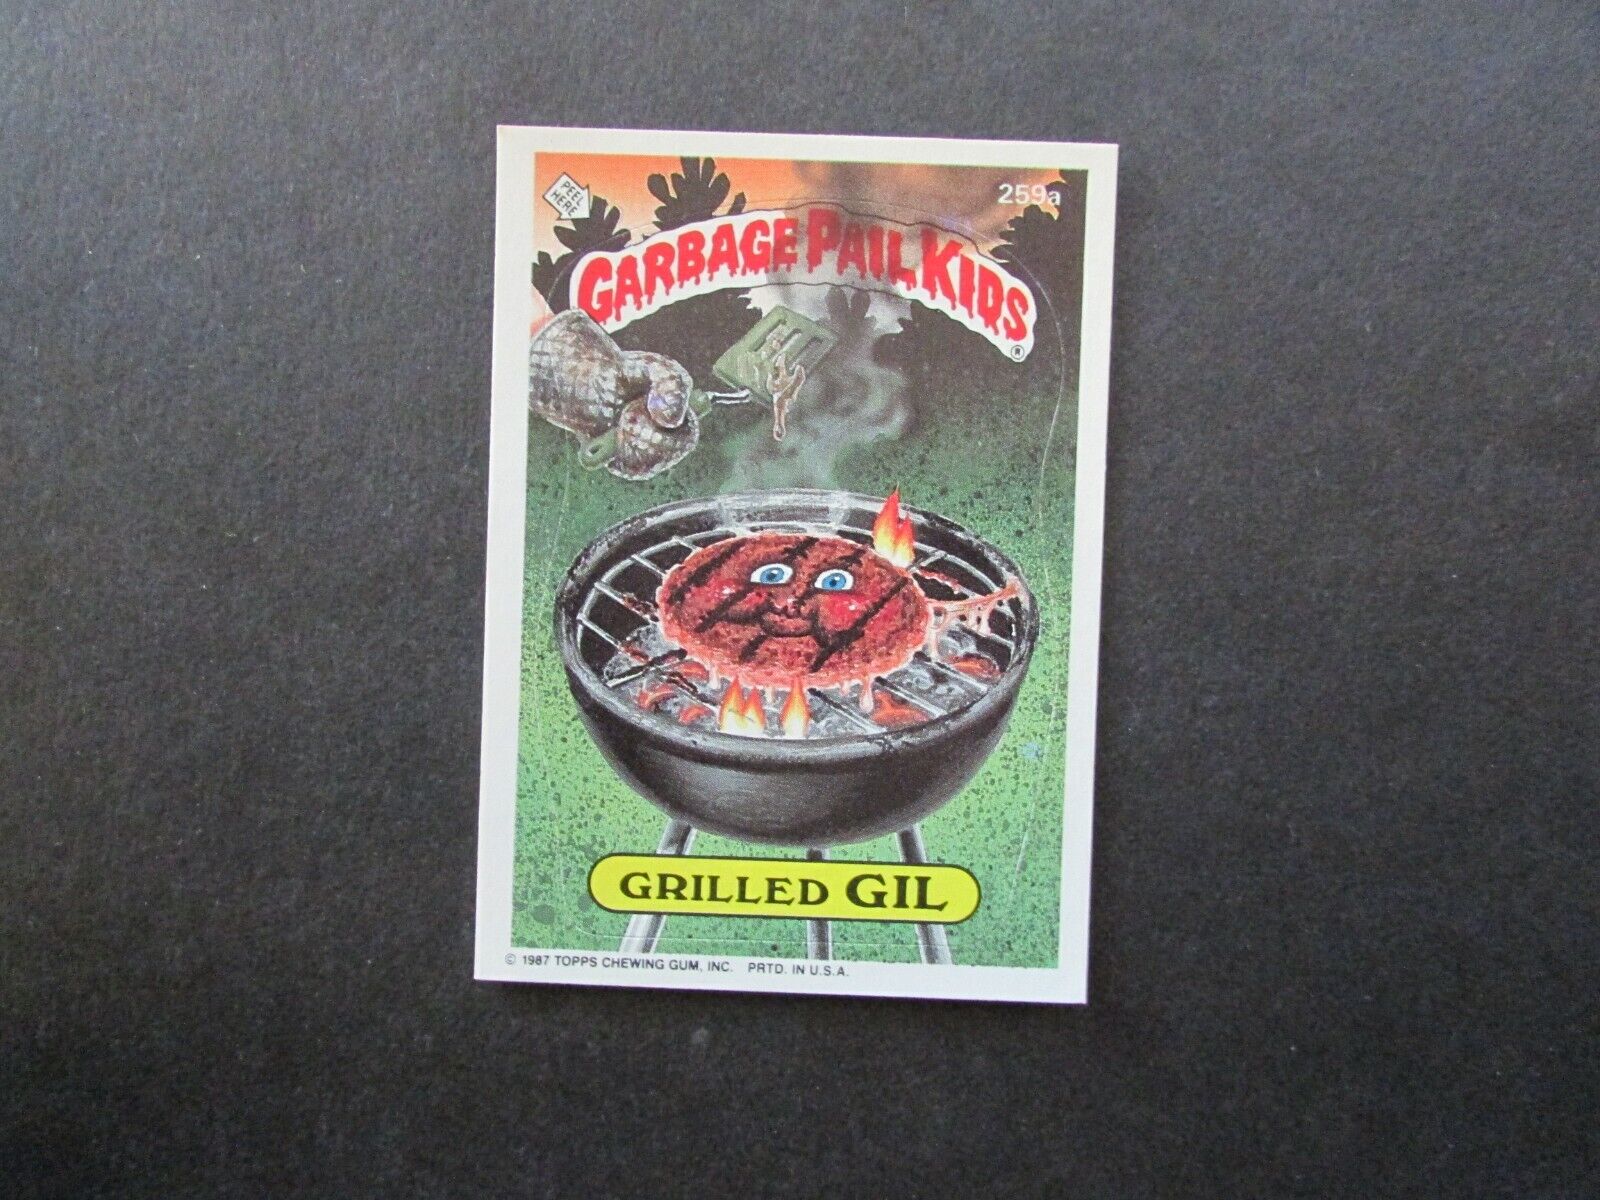 1987 Topps Garbage Pail Kids 7th Series 7 Card 259a Grilled Gil